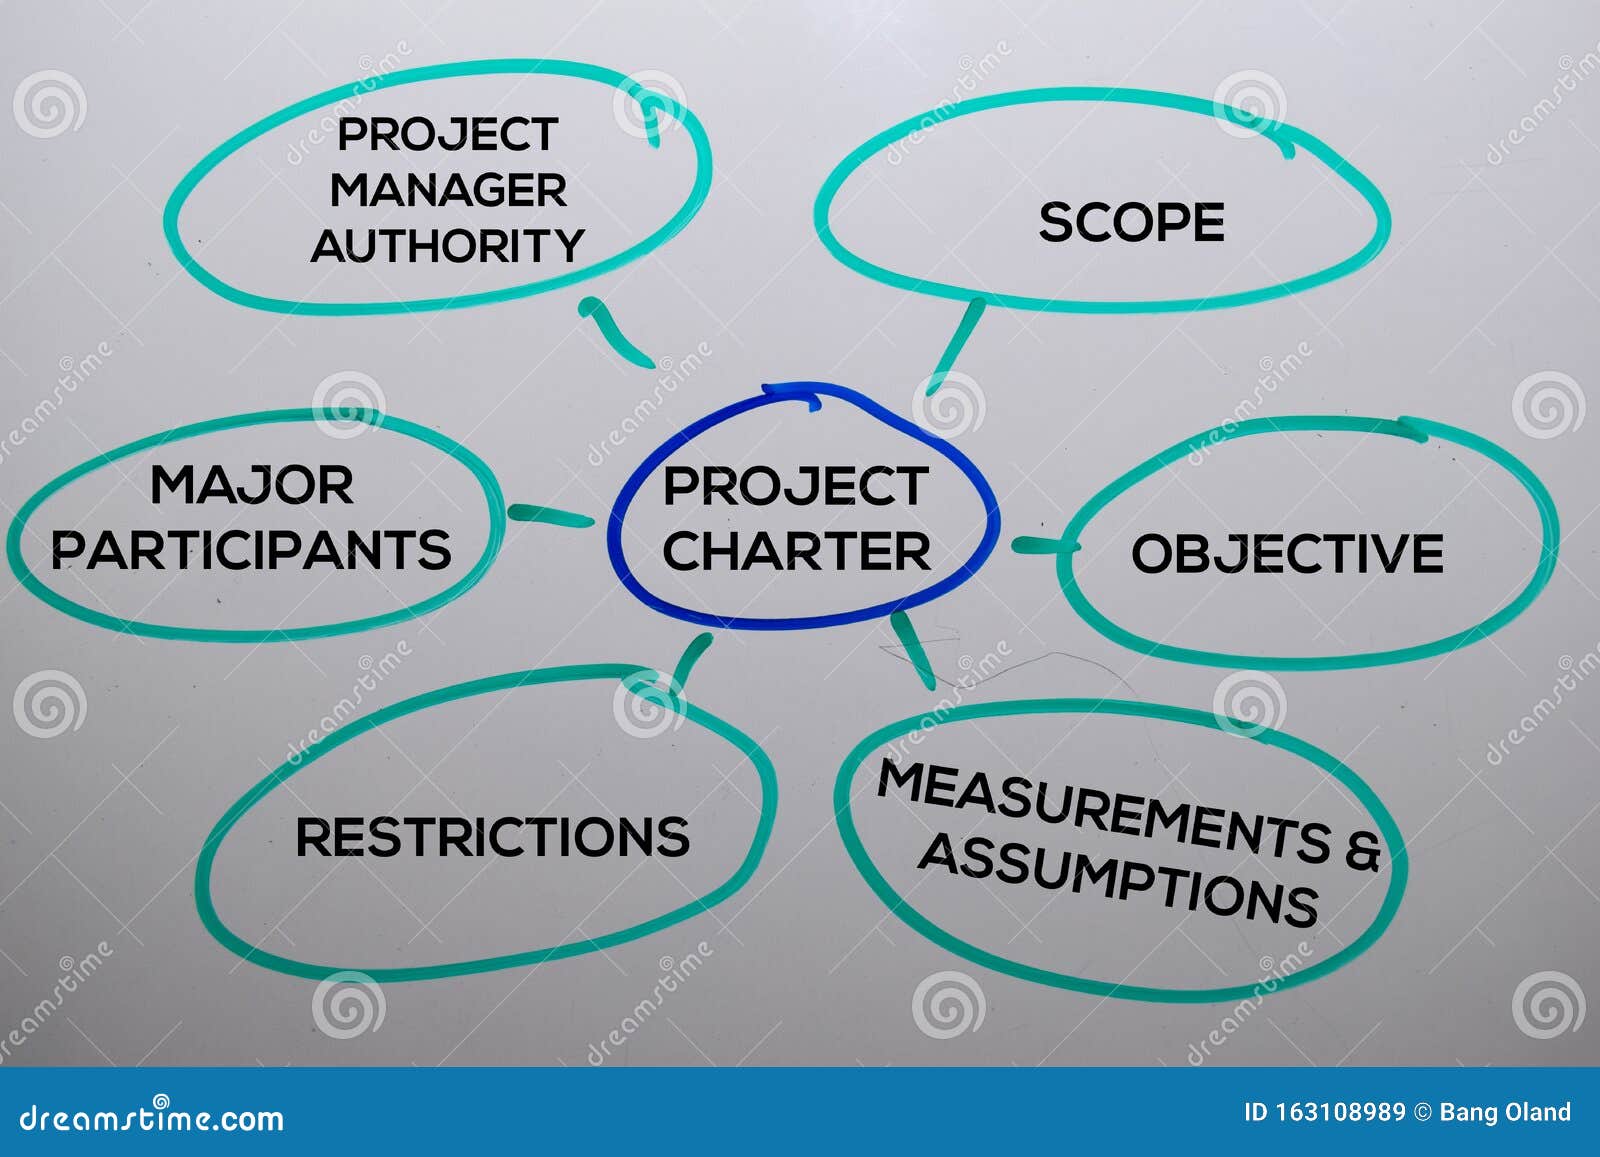 project charter method text with keywords  on white board background. chart or mechanism concept